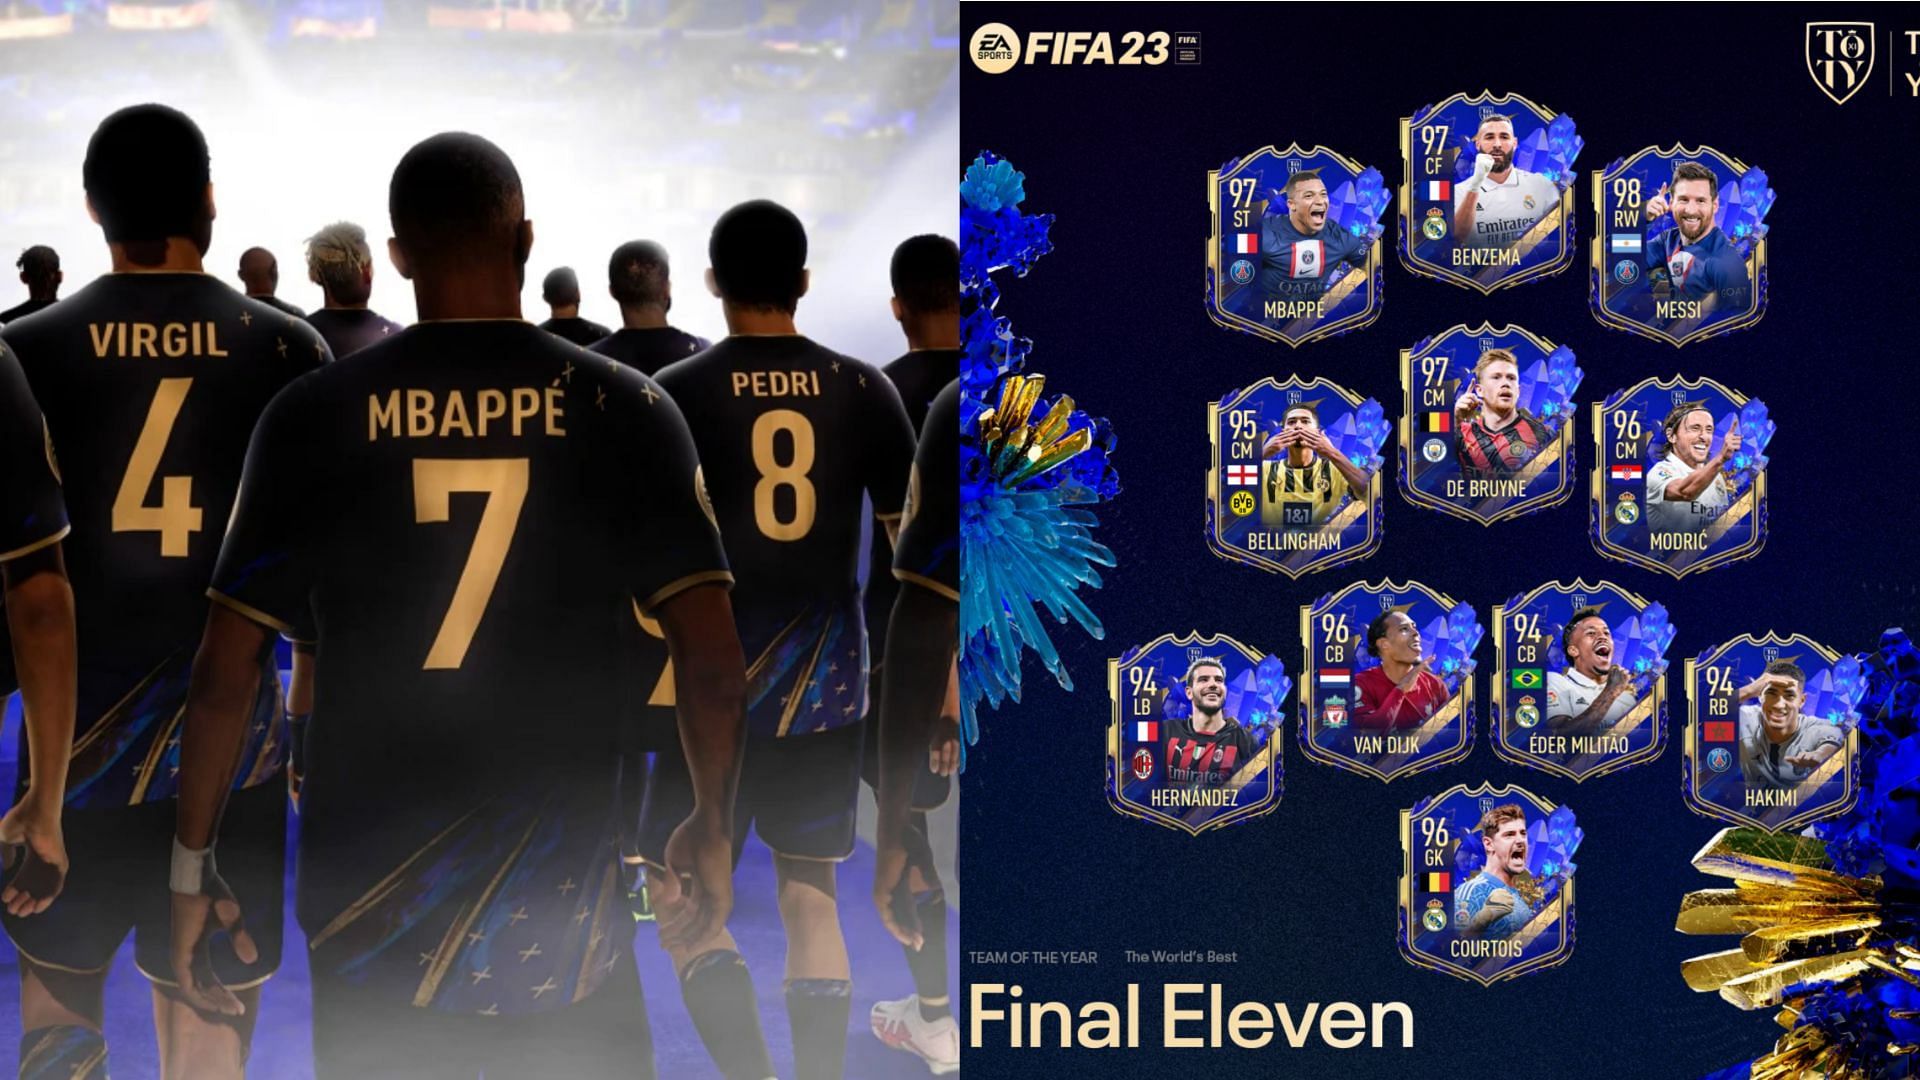 FIFA 23 - Combine Year in Review Objectives to get TOTY rewards FAST